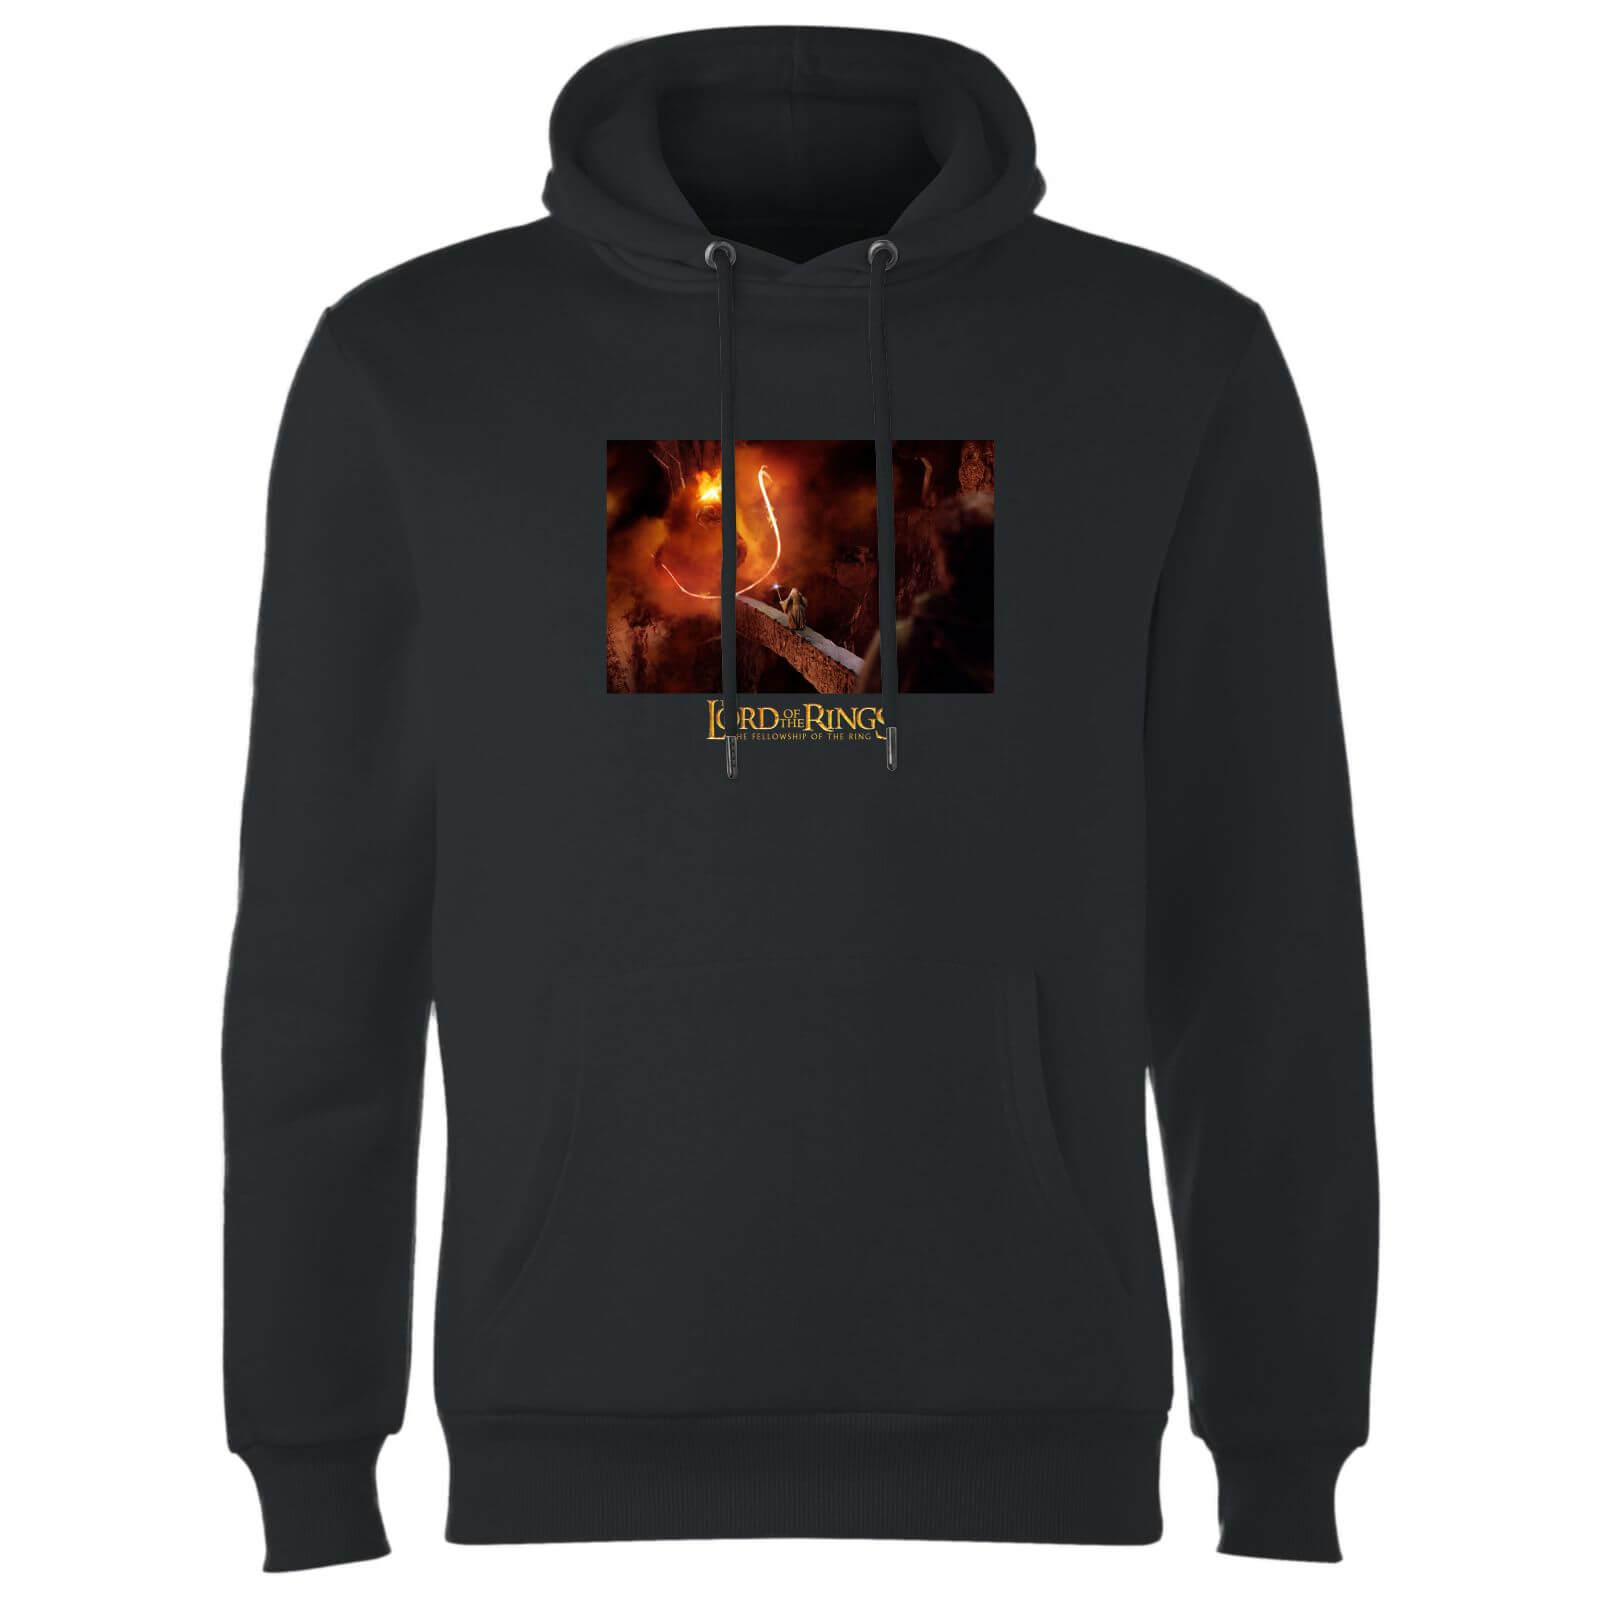 Lord Of The Rings You Shall Not Pass Hoodie - Black - S - Noir